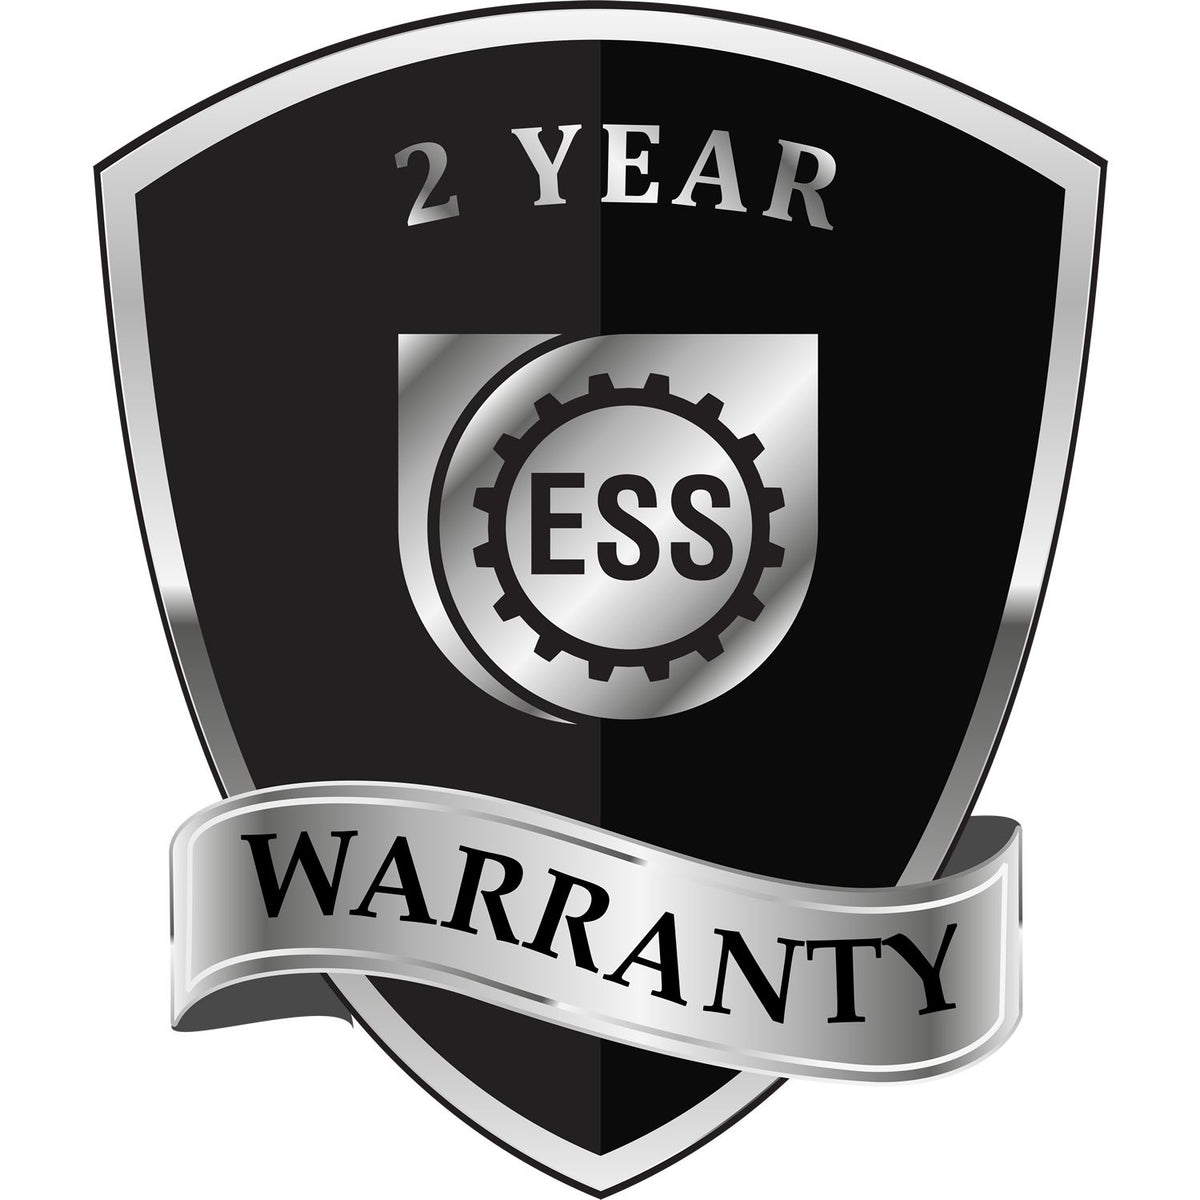 A badge or emblem showing a warranty icon for the Tennessee Engineer Desk Seal